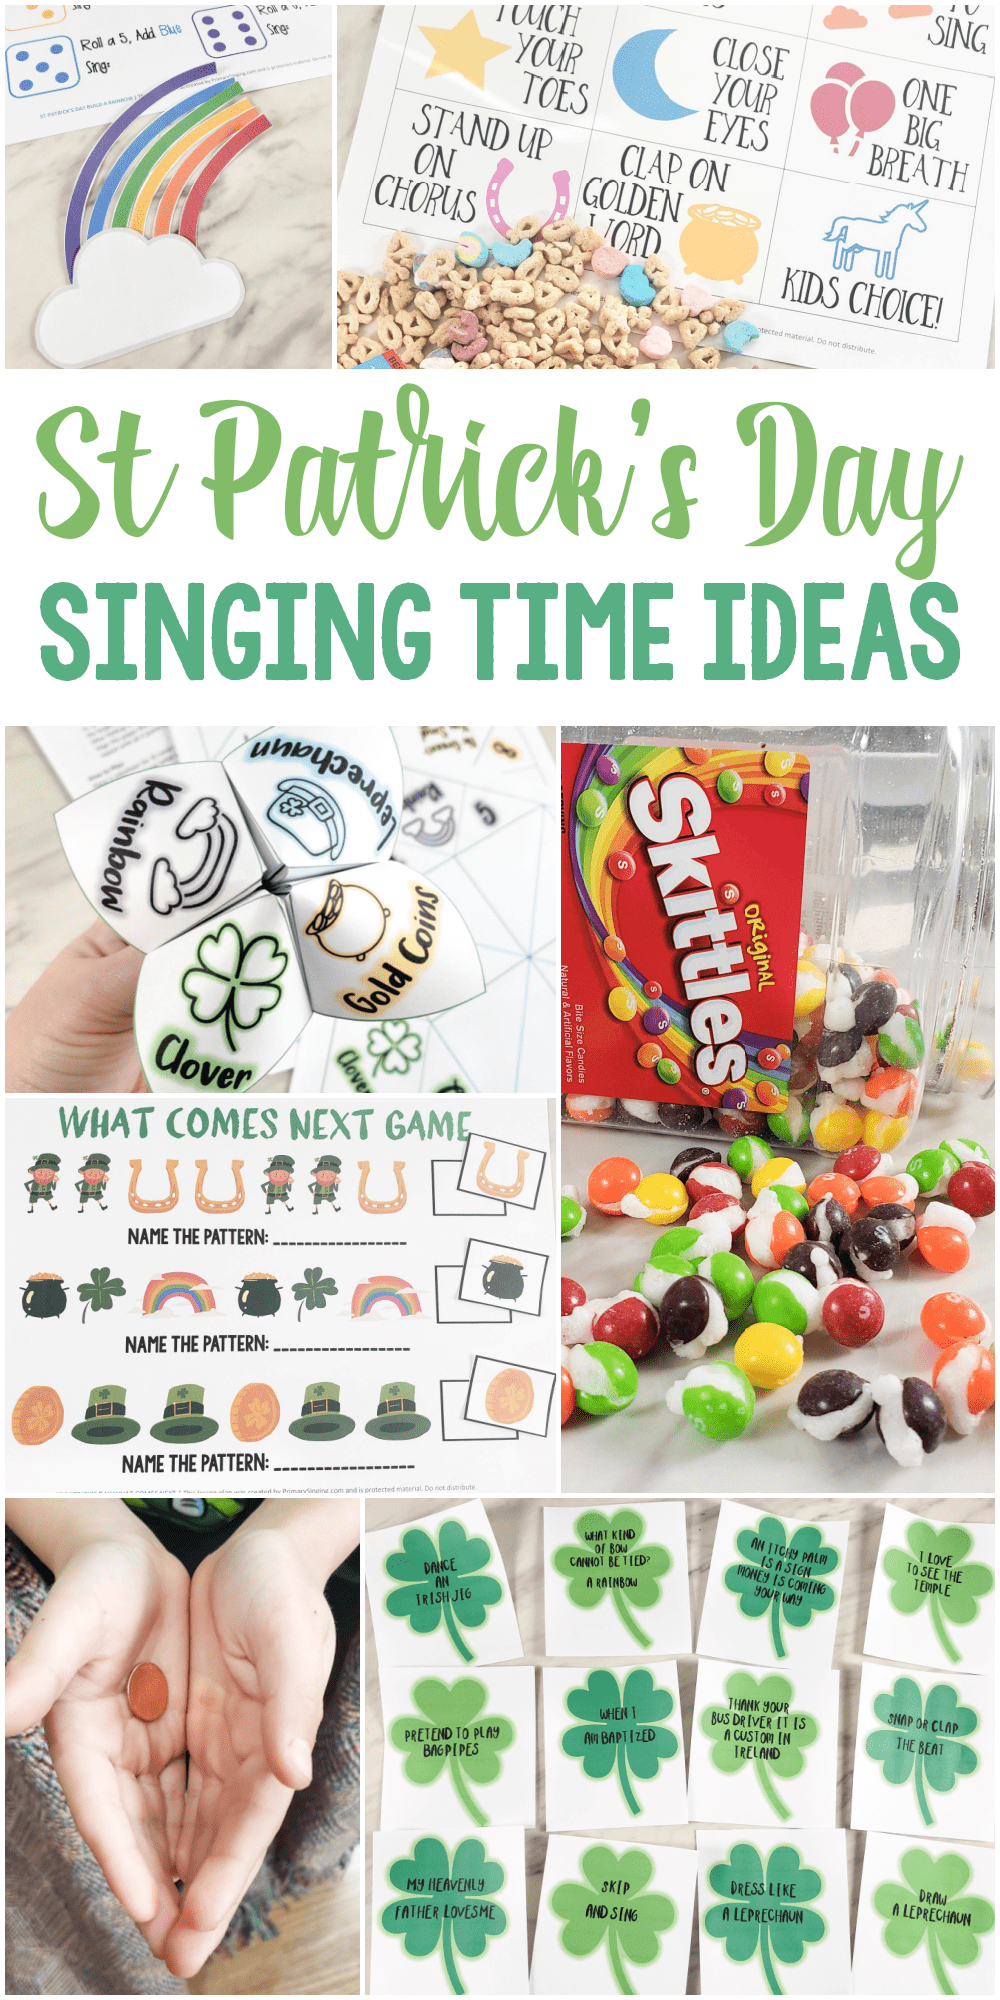 Fun St Patrick's Day Singing Time Ideas for LDS Primary songs. Includes printable ideas and exclusive review games for Music Leaders and teachers!